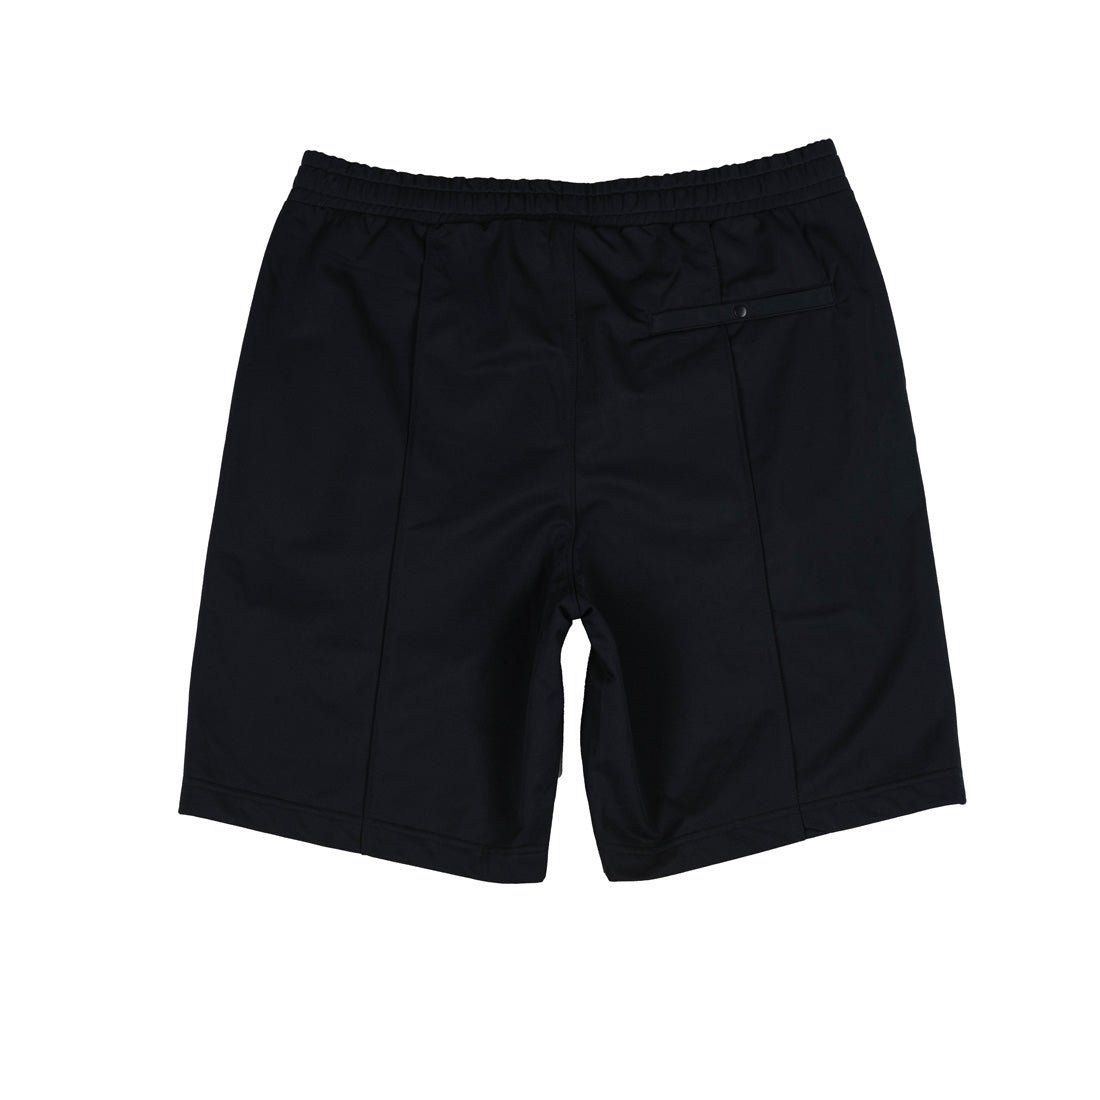 H&M Brand New Shorts For Men - mymadstore.com